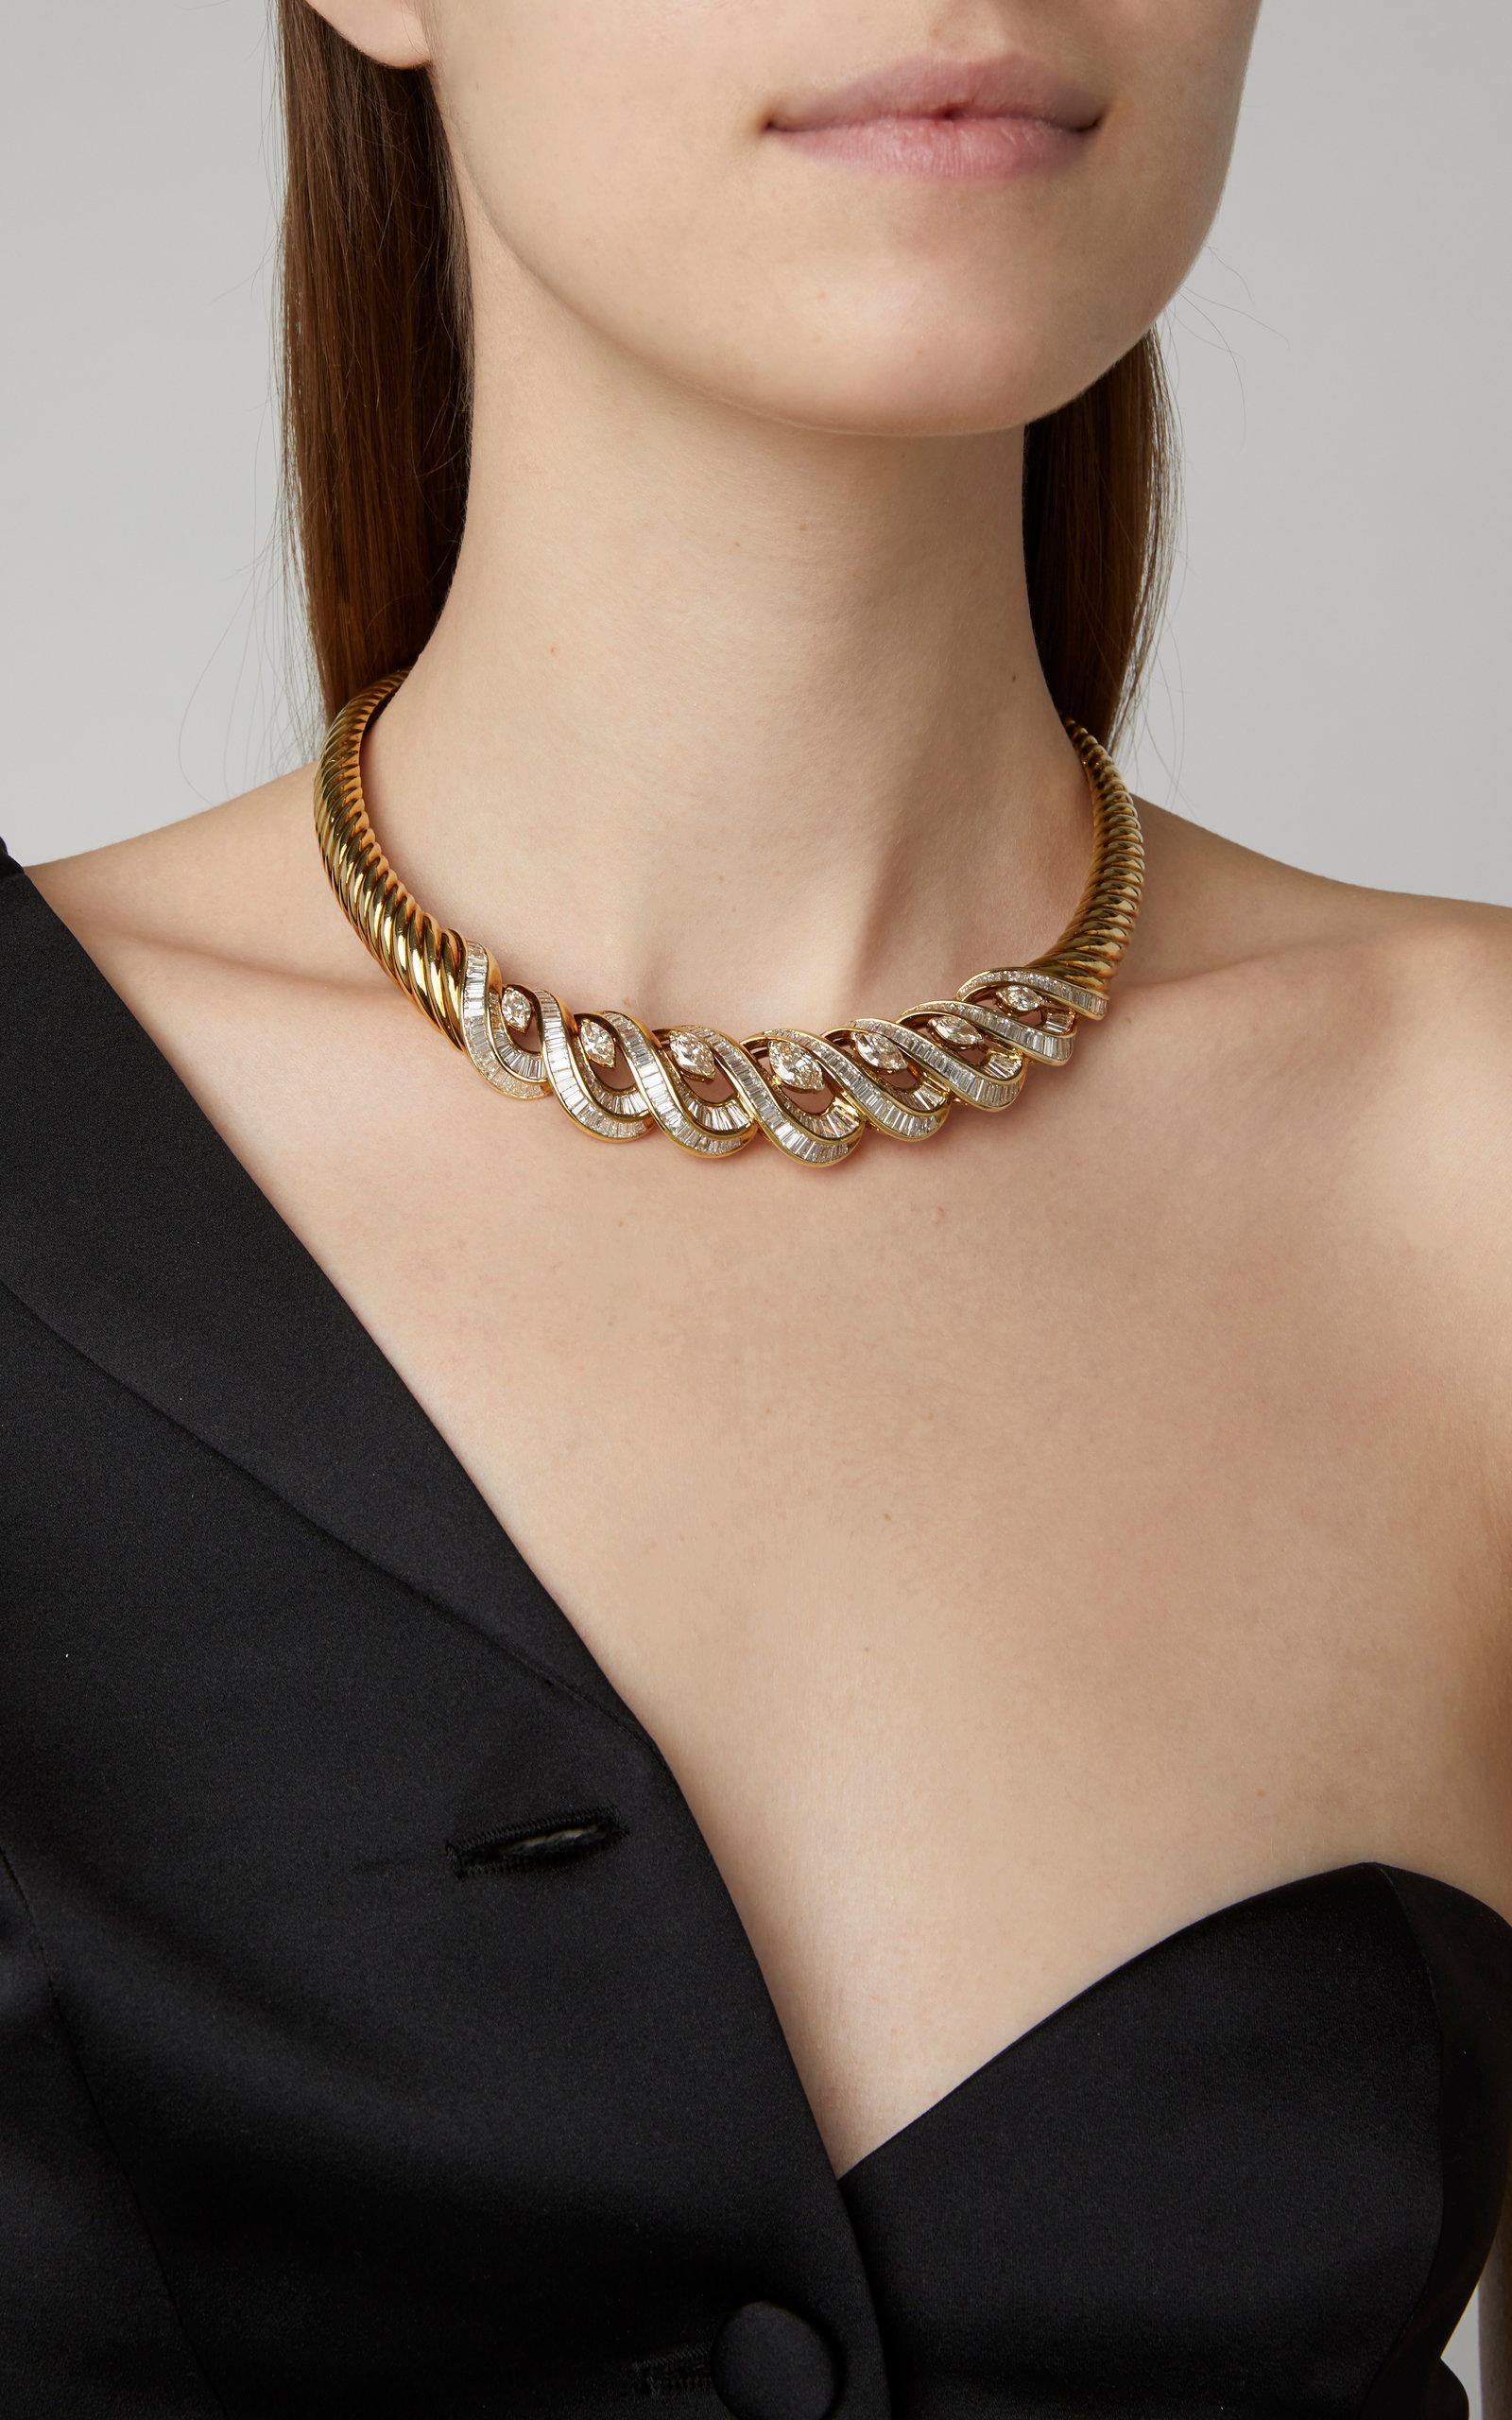 A refined necklace of undulated design in 18kt yellow gold with marquise and baguette cut diamonds (27 cts total). Made in Italy, circa 1960s.